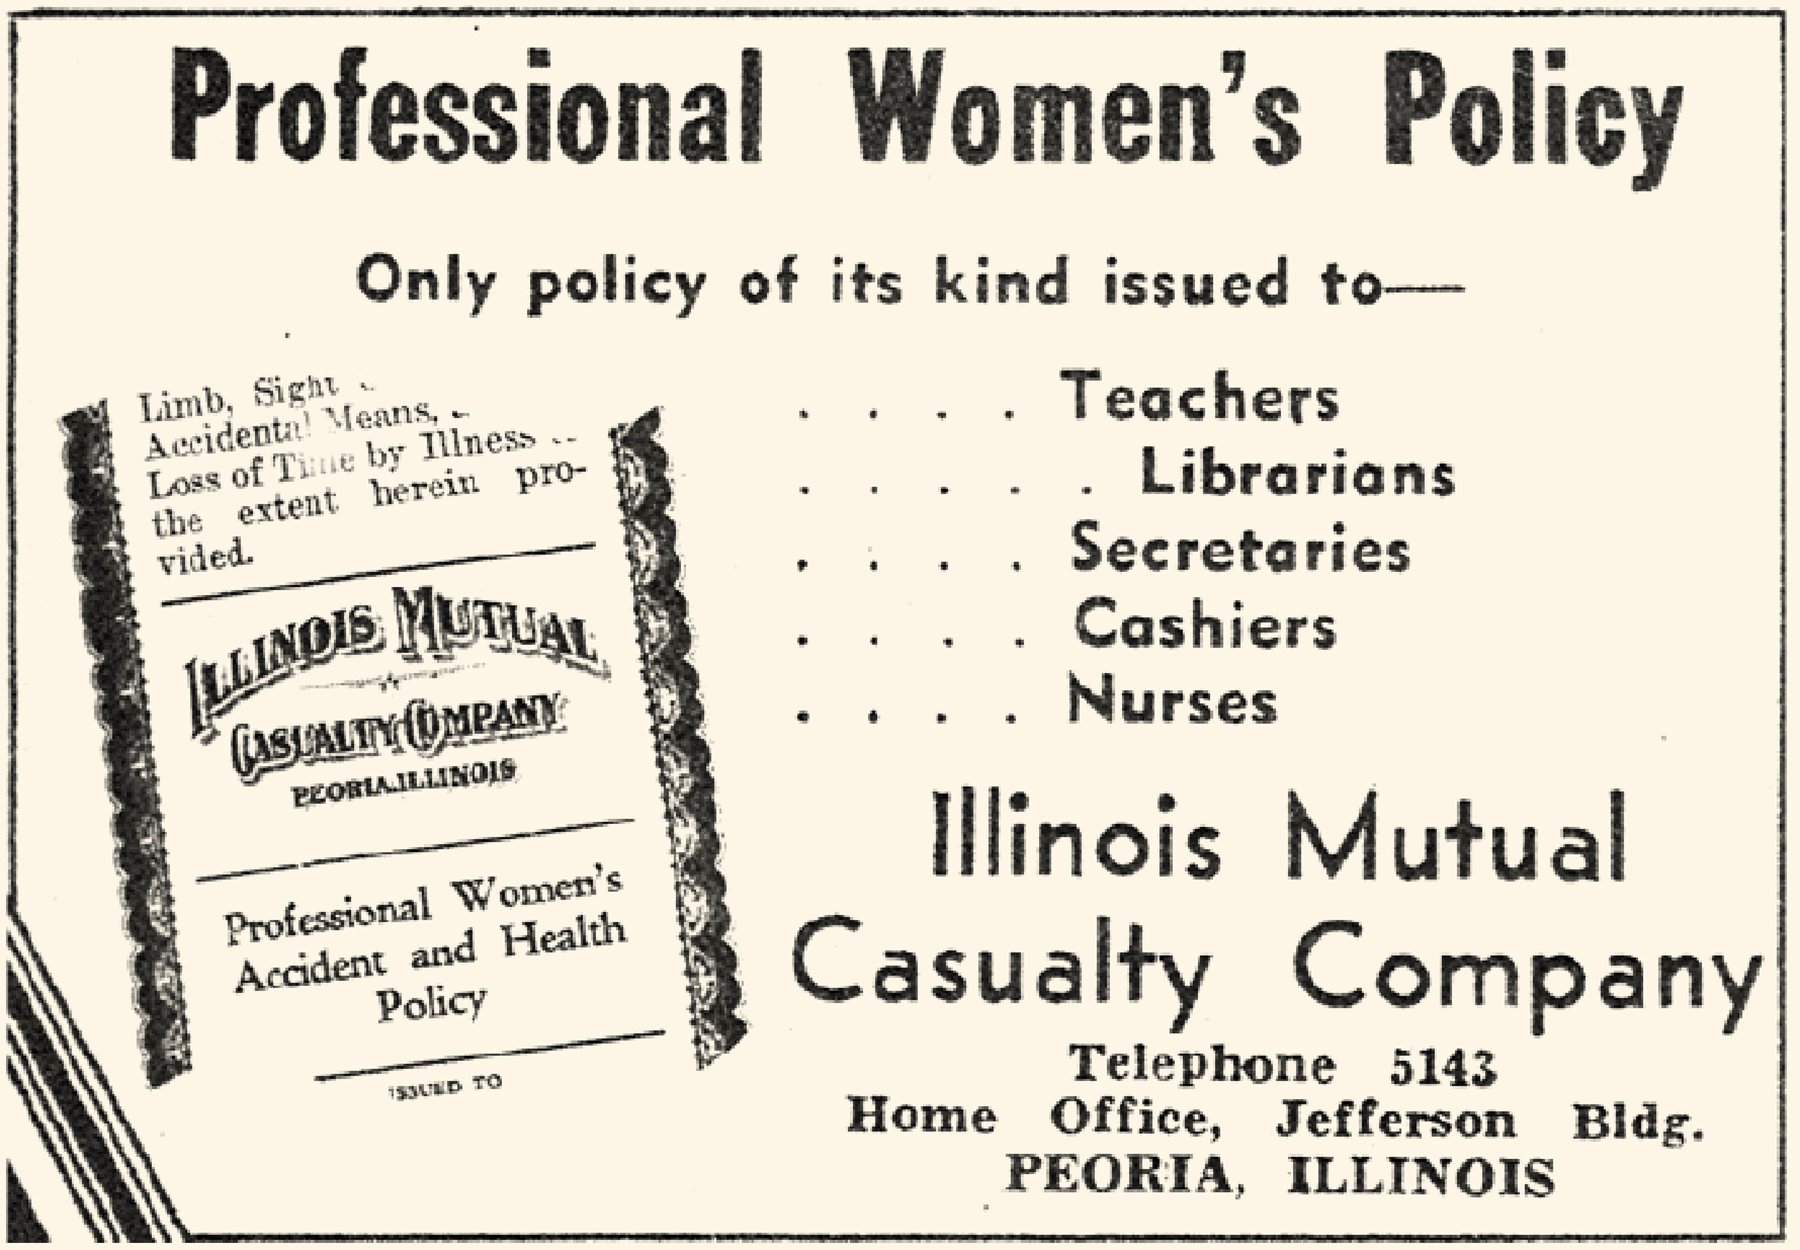 Advertisement for Illinois Mutual's professional women's policy